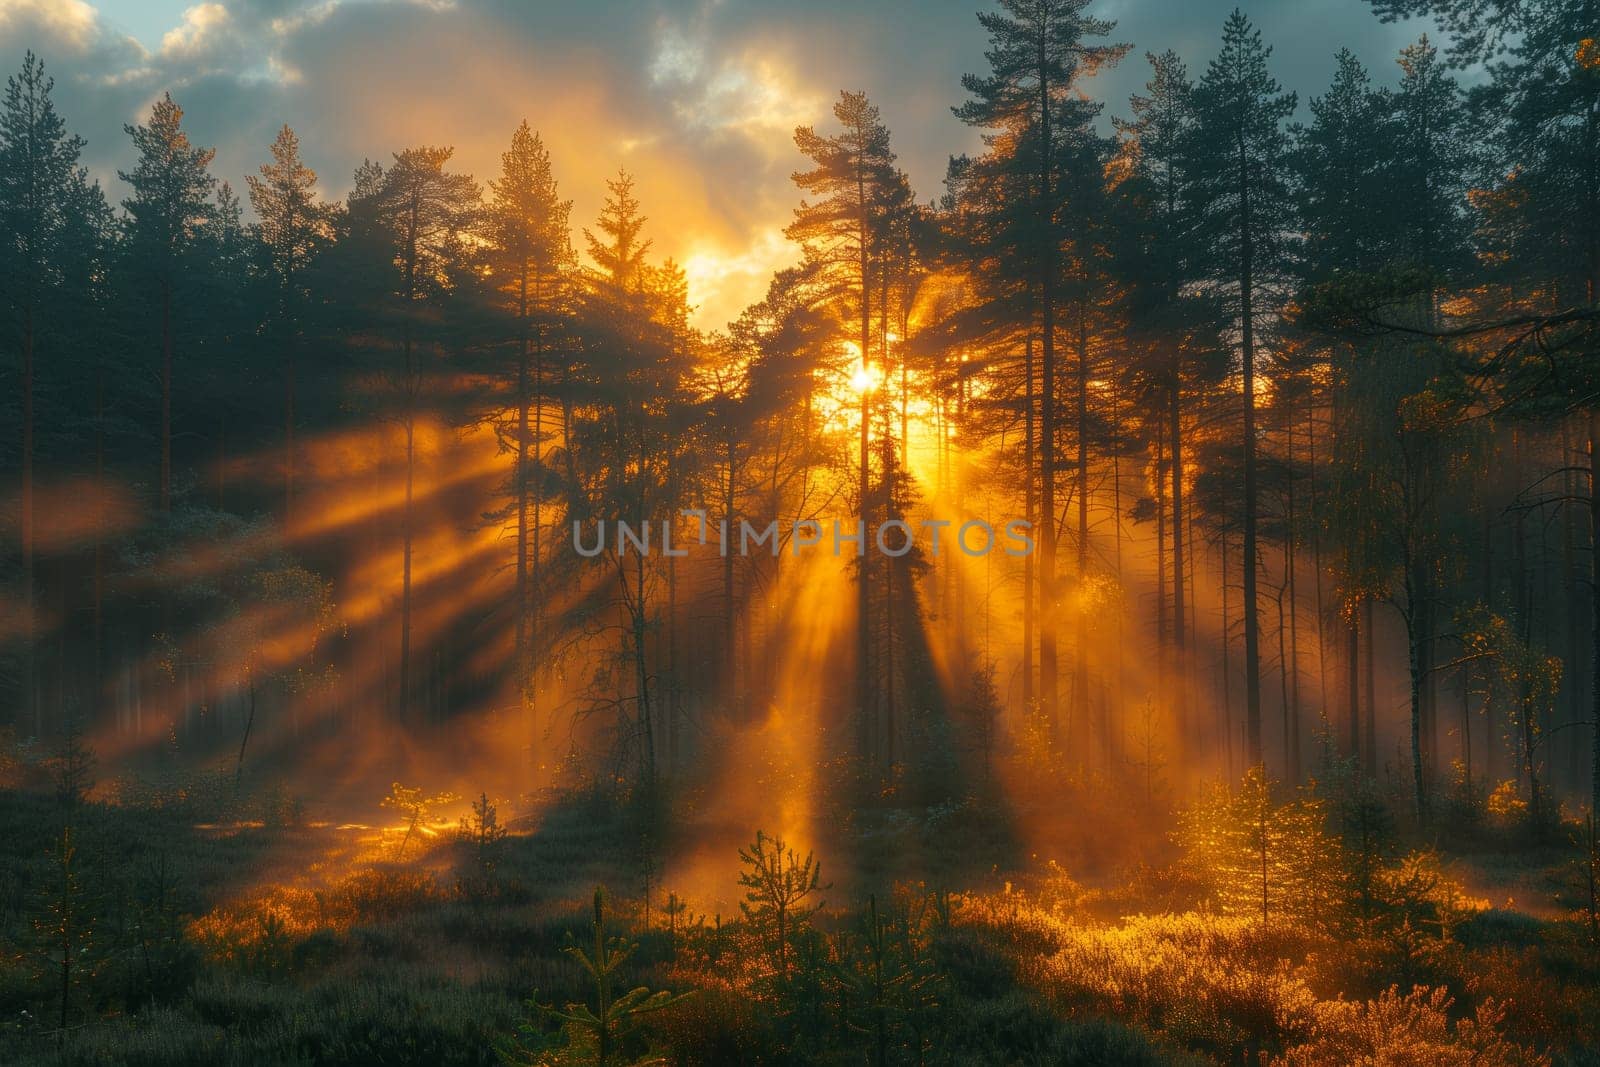 Sunlight filters through forest trees at sunset, creating a magical atmosphere by richwolf